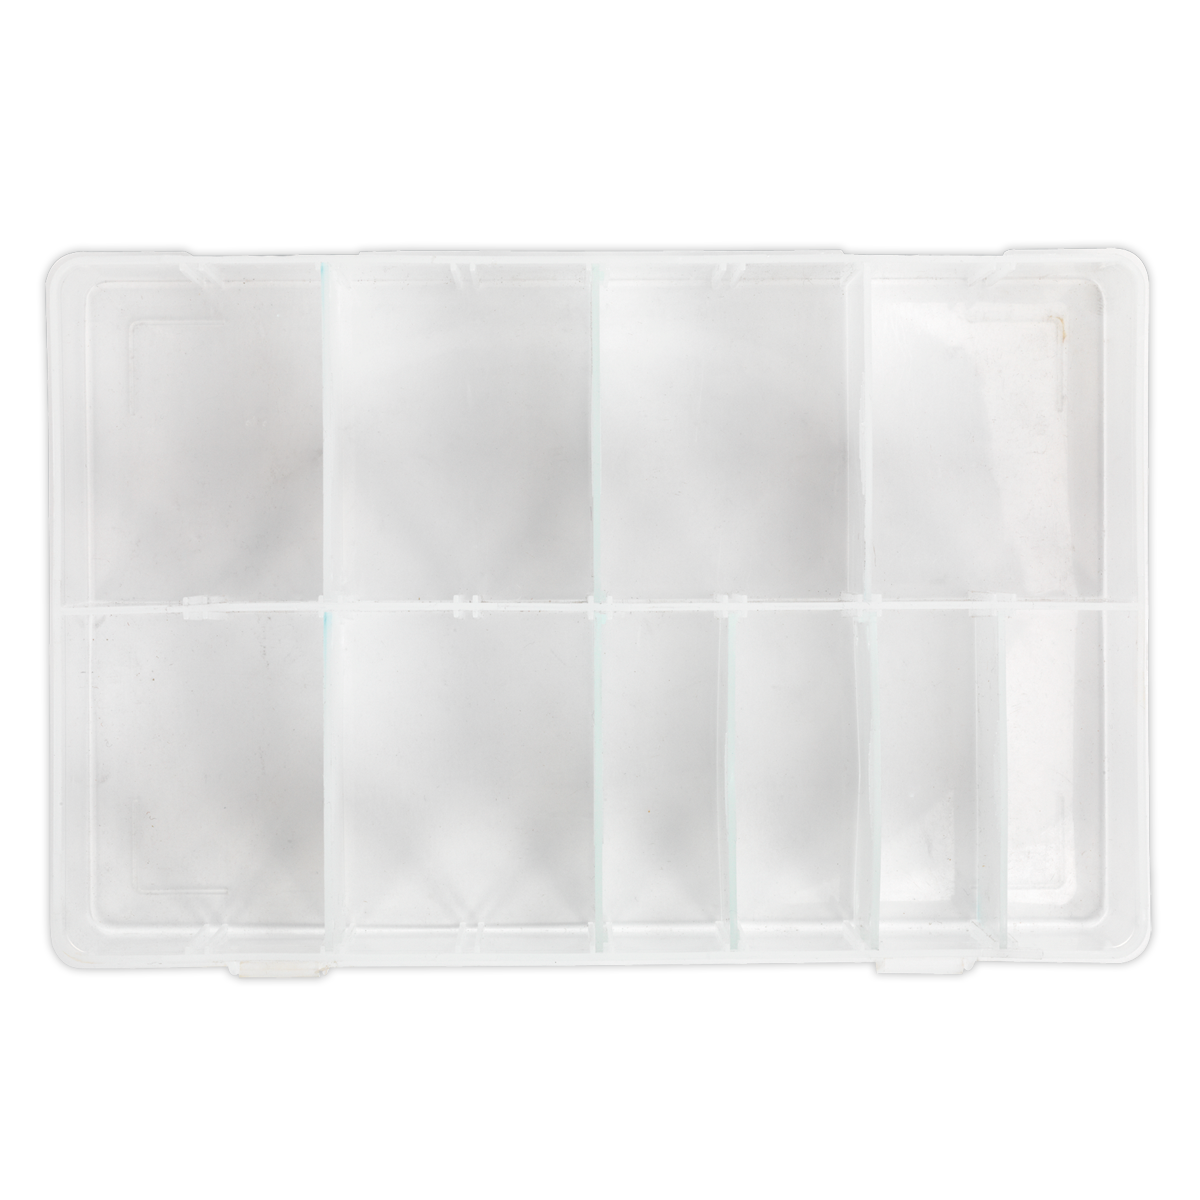 Assortment Box with 8 Removable Dividers - ABBOXMED - Farming Parts